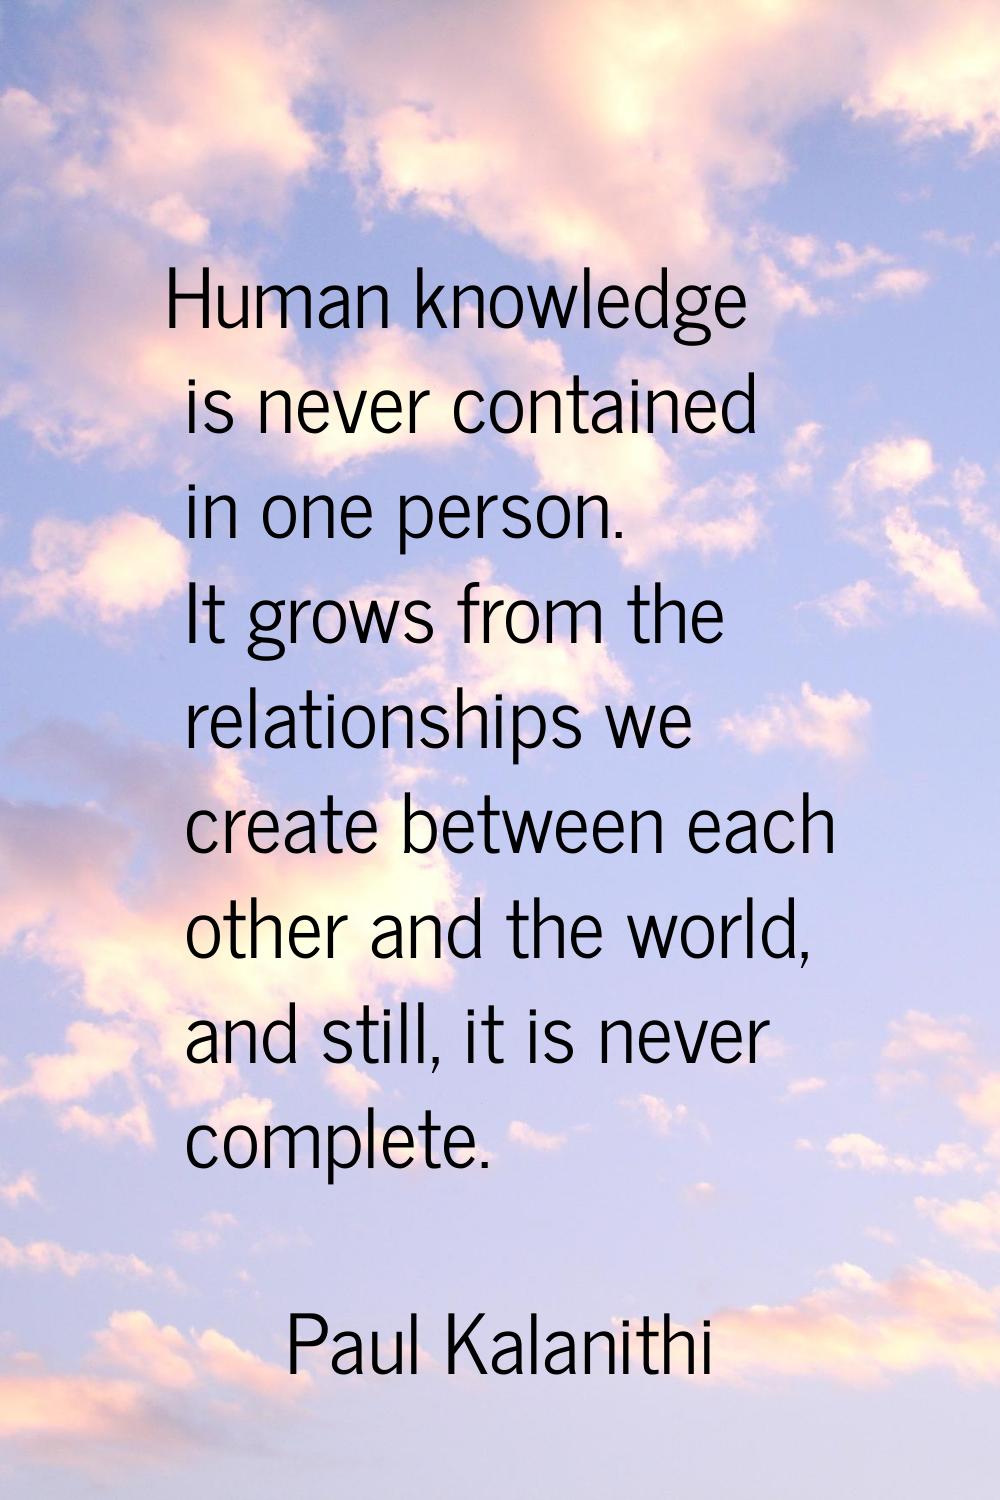 Human knowledge is never contained in one person. It grows from the relationships we create between